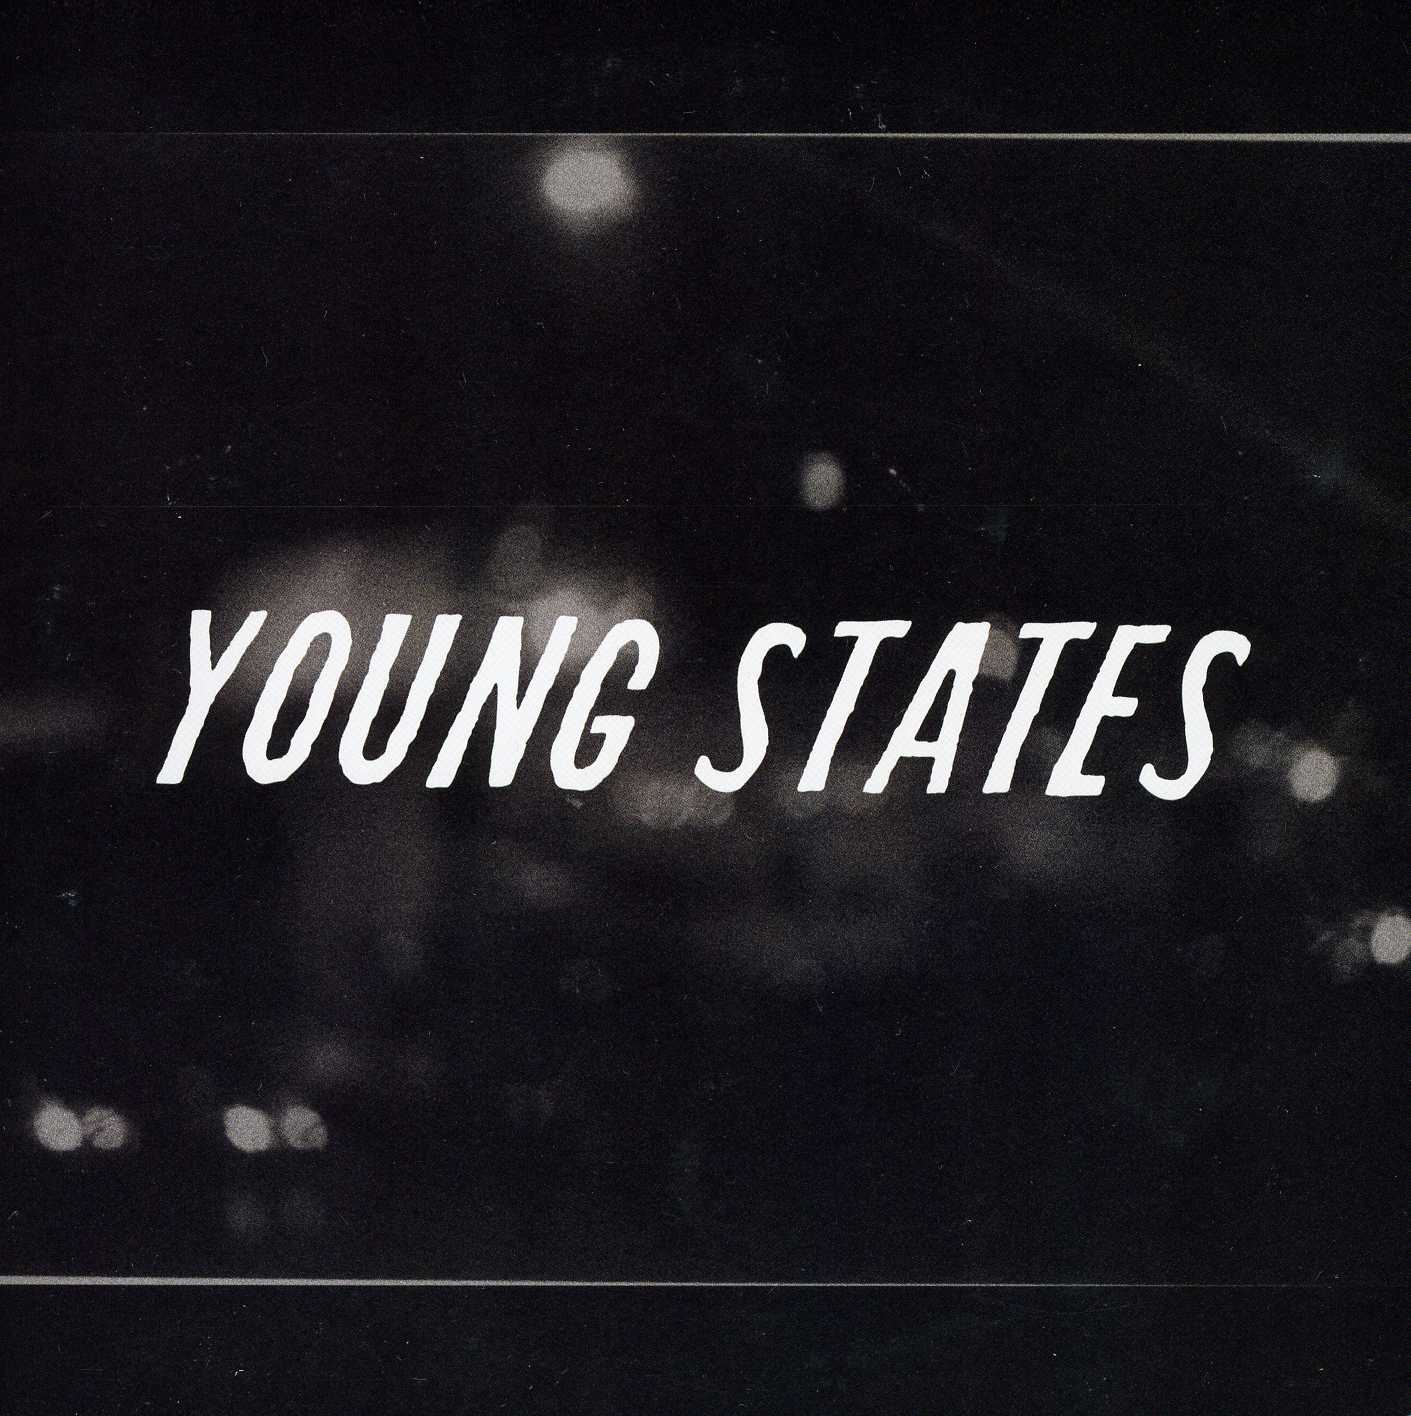 YOUNG STATES